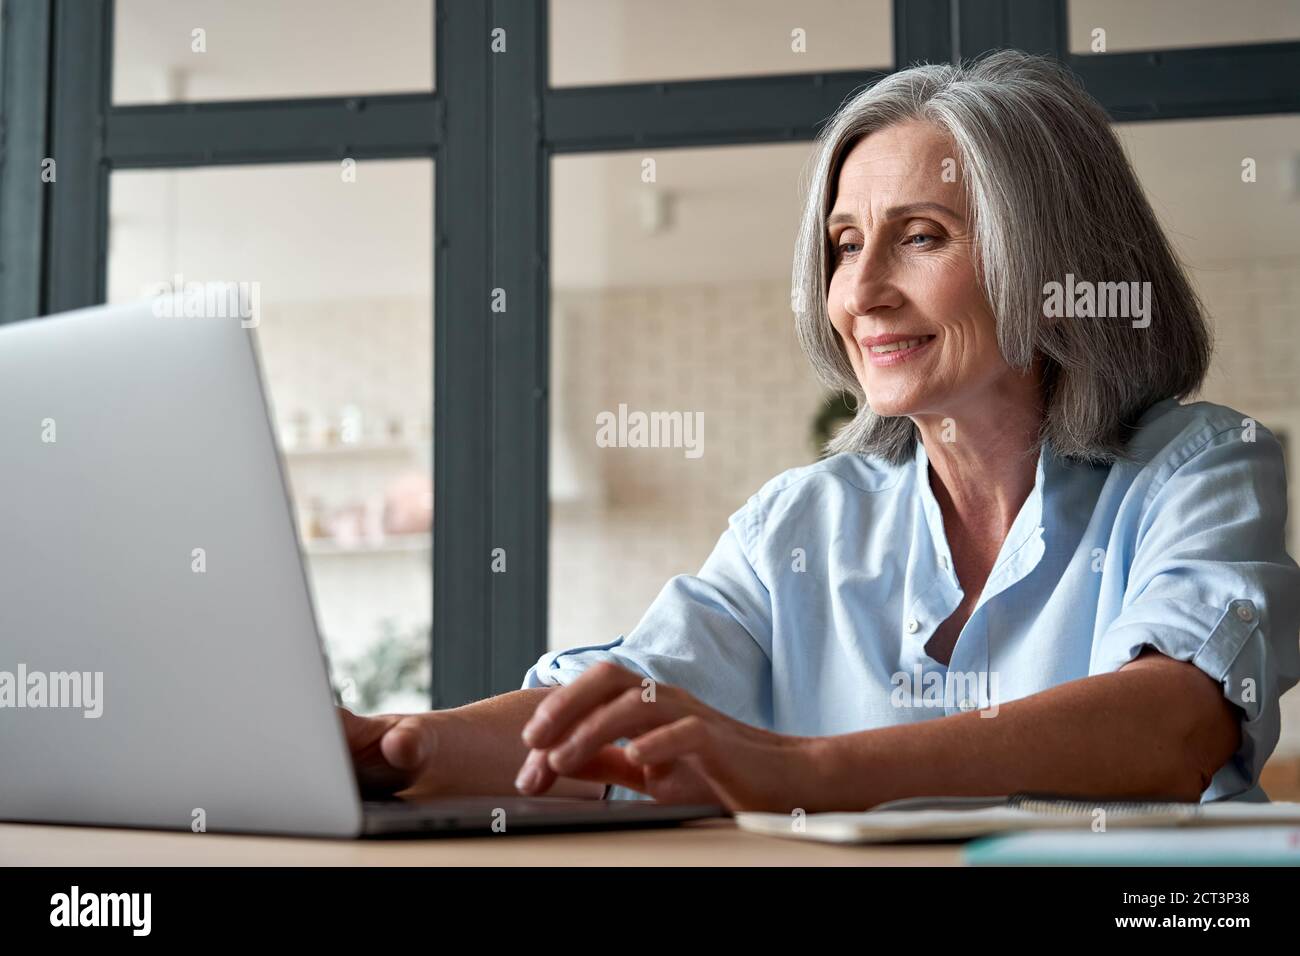 Smiling mature middle aged woman using laptop computer sitting at workplace. Stock Photo